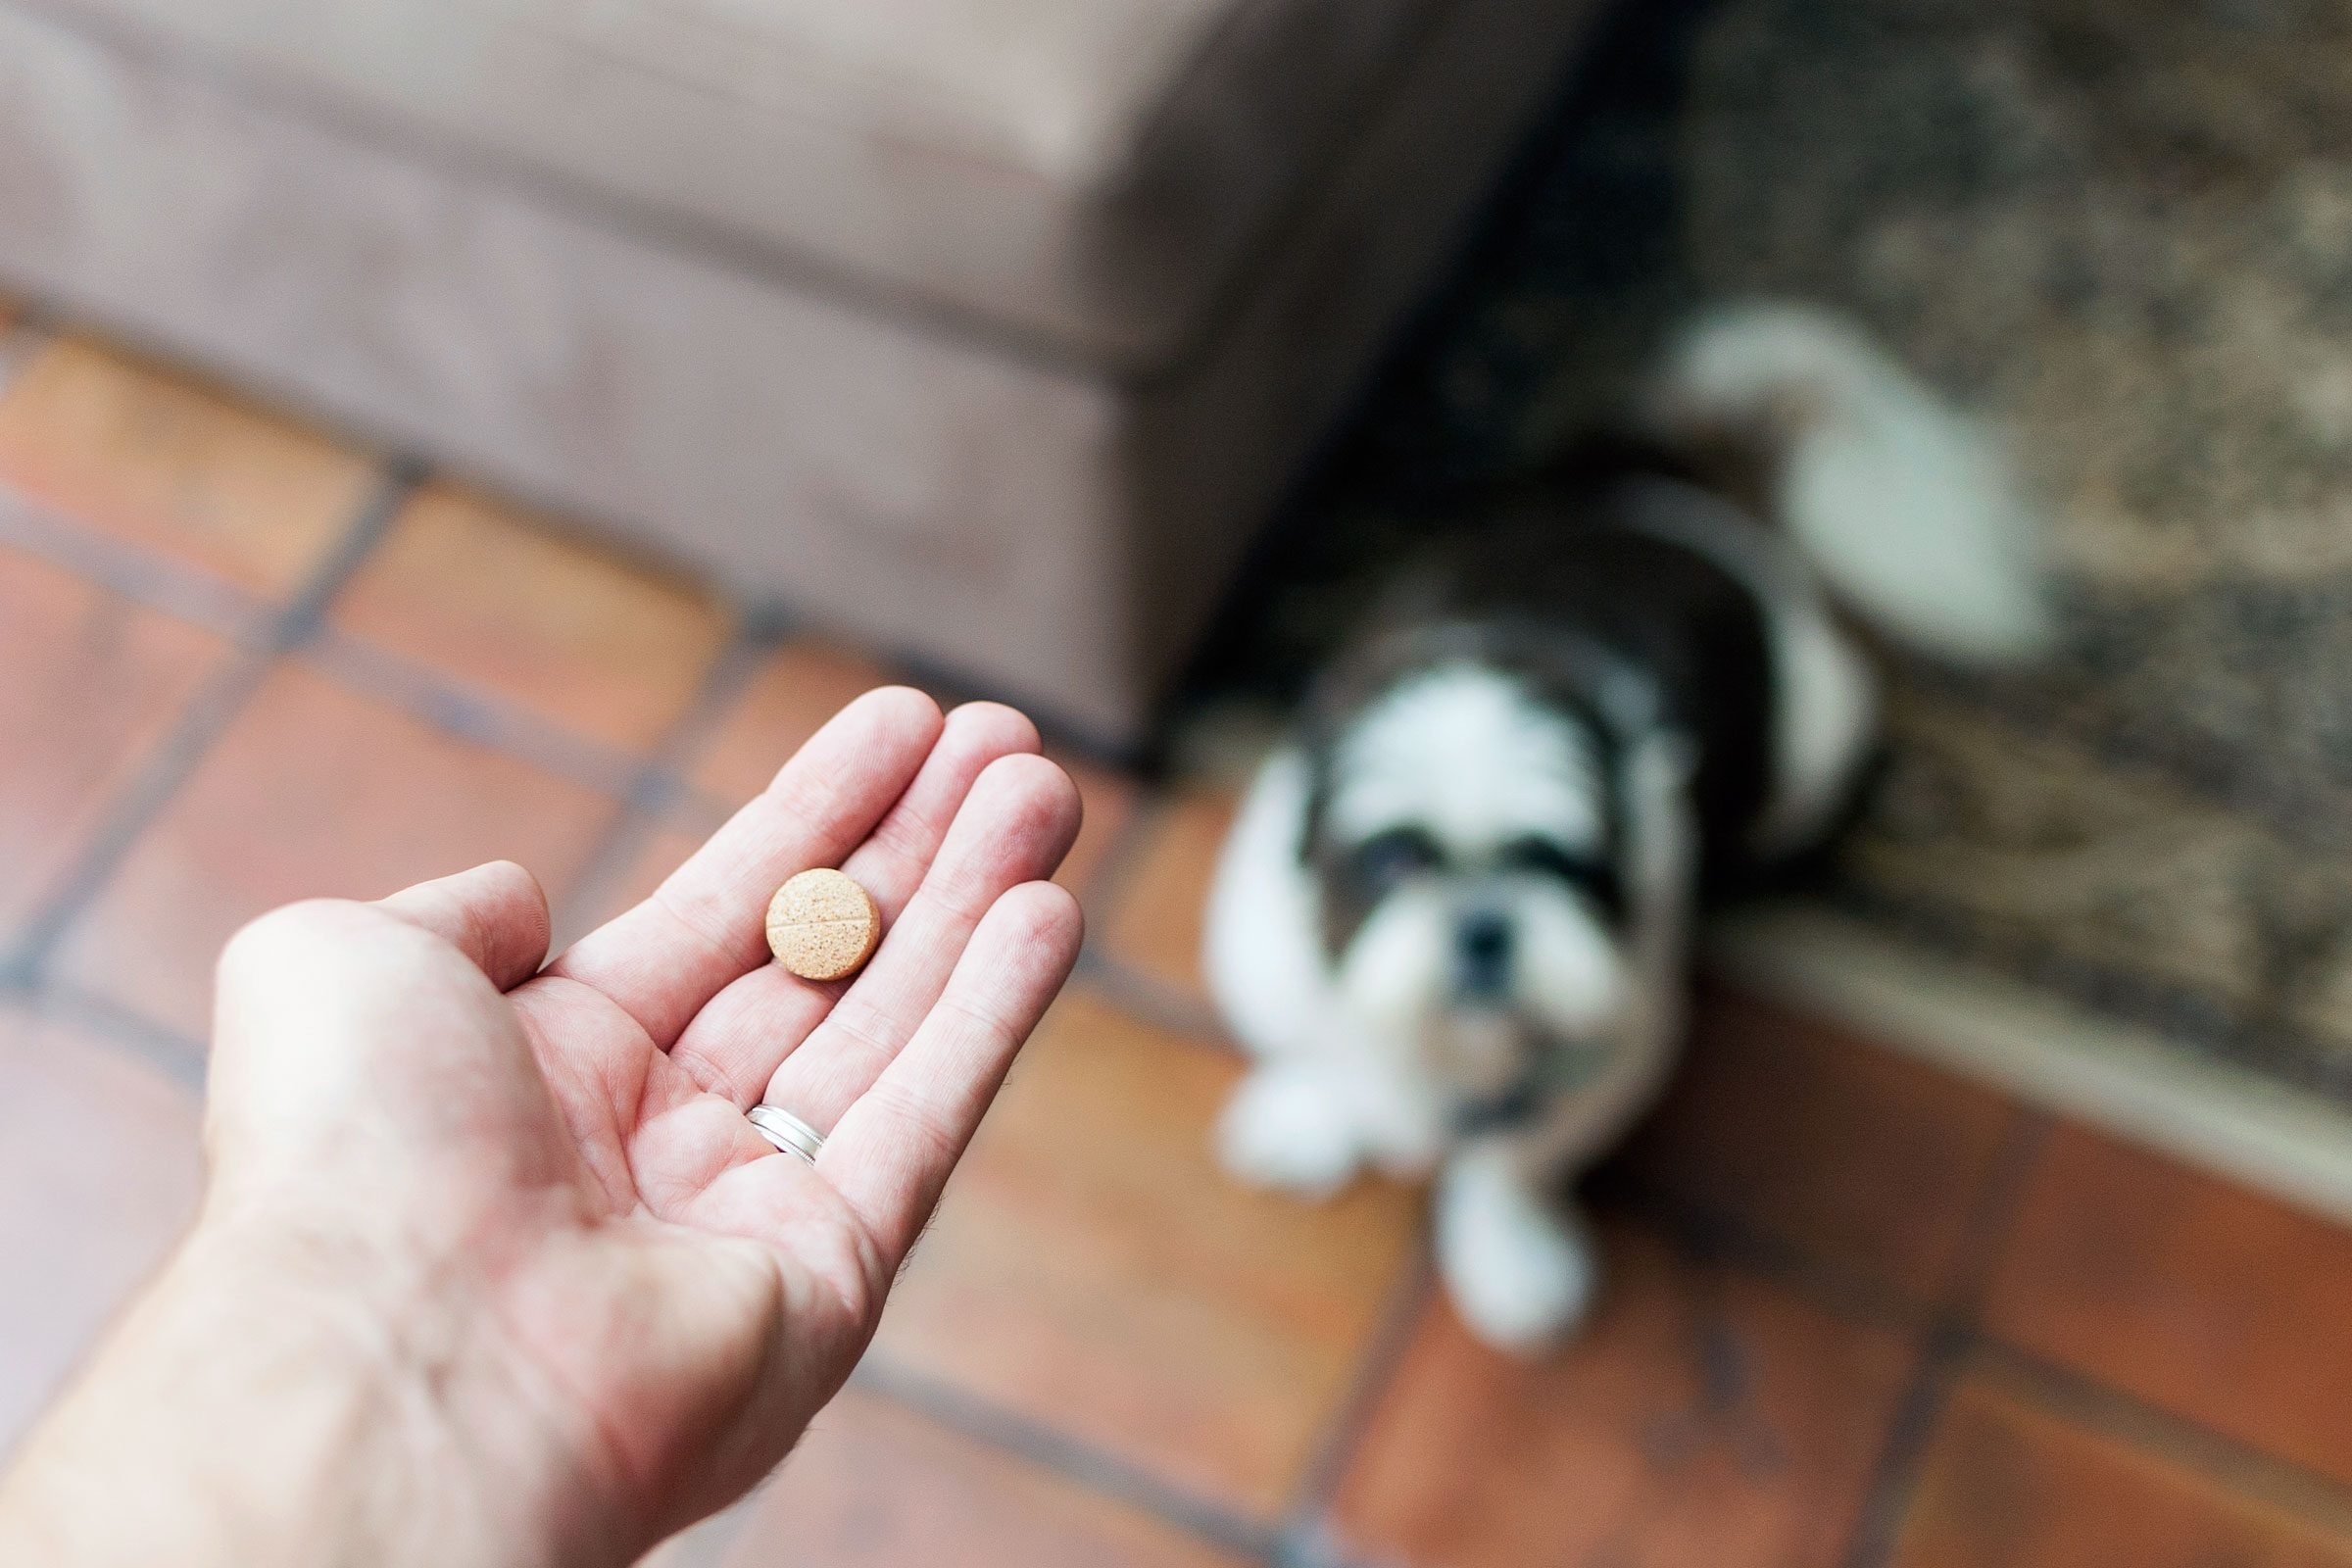 What are some types of oral medications for pet euthanasia?